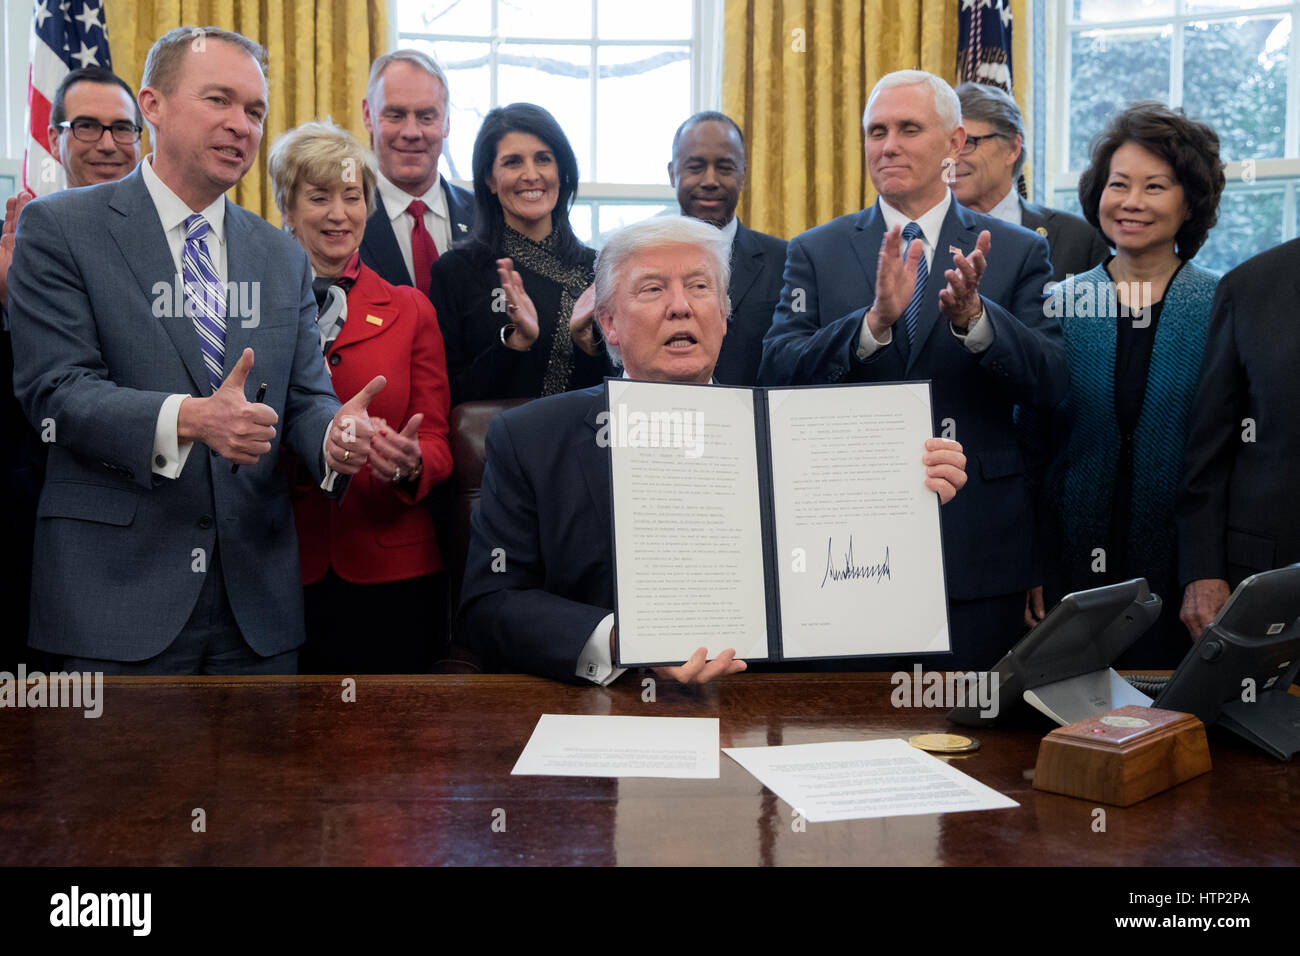 Washington DC, USA 13th March, 2017 US President Donald J Trump (C) shows an executive order entitled, 'Comprehensive Plan for Reorganizing the Executive Branch', after signing it beside members of his Cabinet in the Oval Office of the White House in Wash Stock Photo